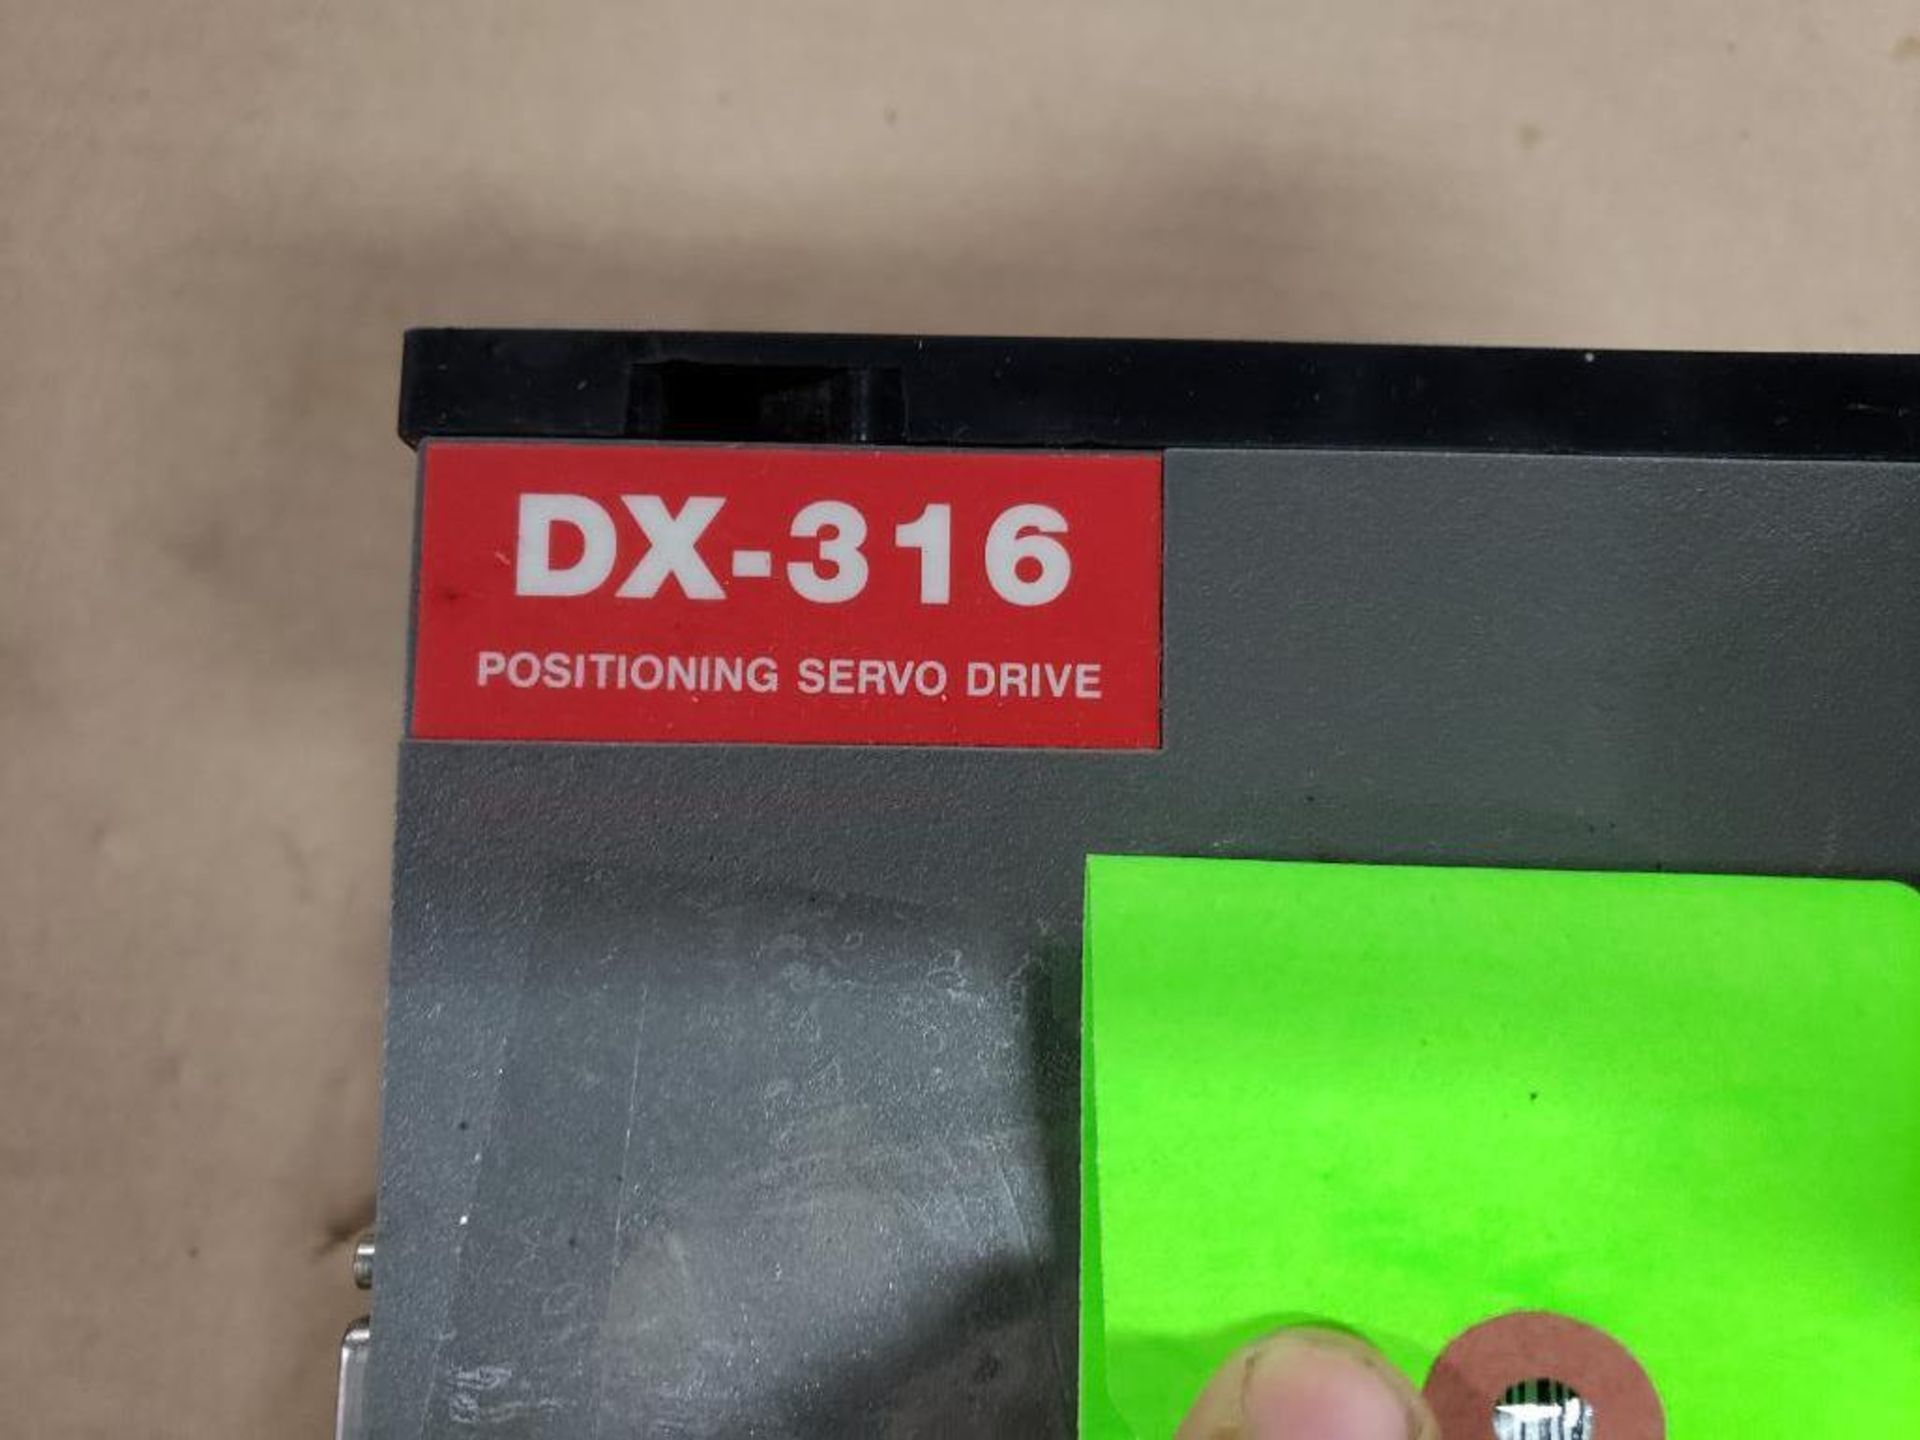 Emerson DX-316 positioning servo drive. DXA-316. - Image 2 of 6